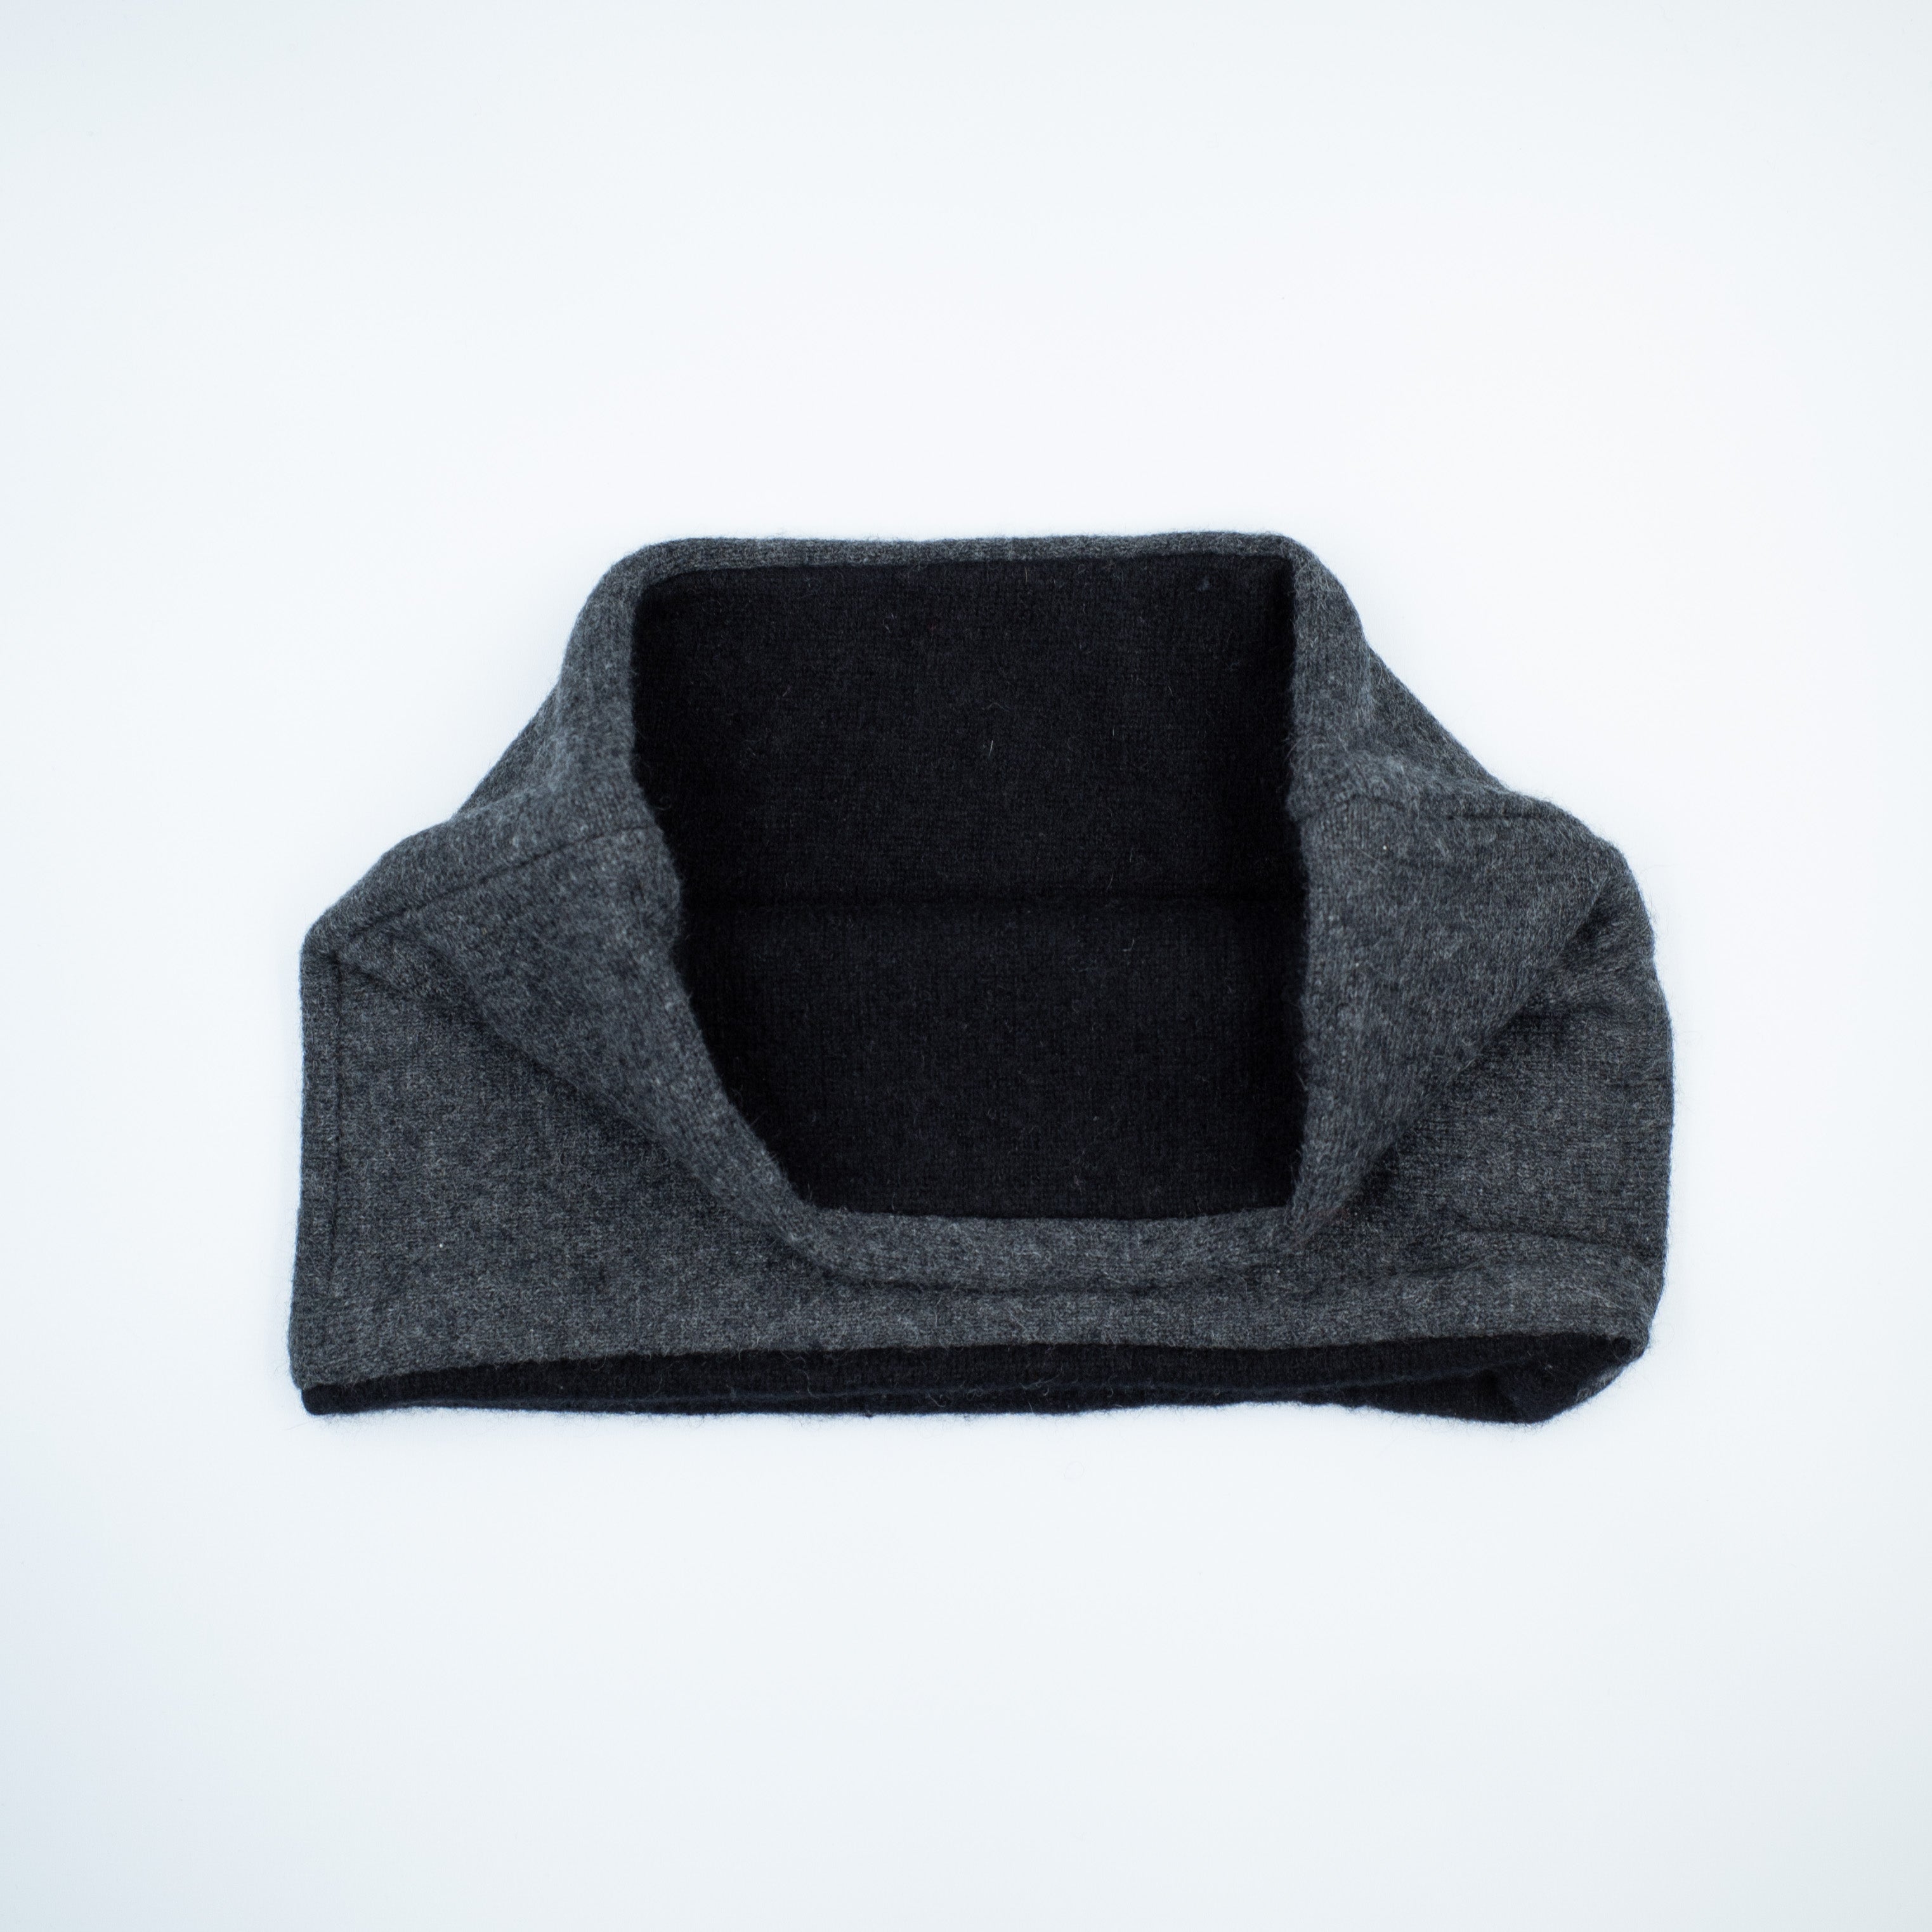 Black and Charcoal Grey Neck Warmer